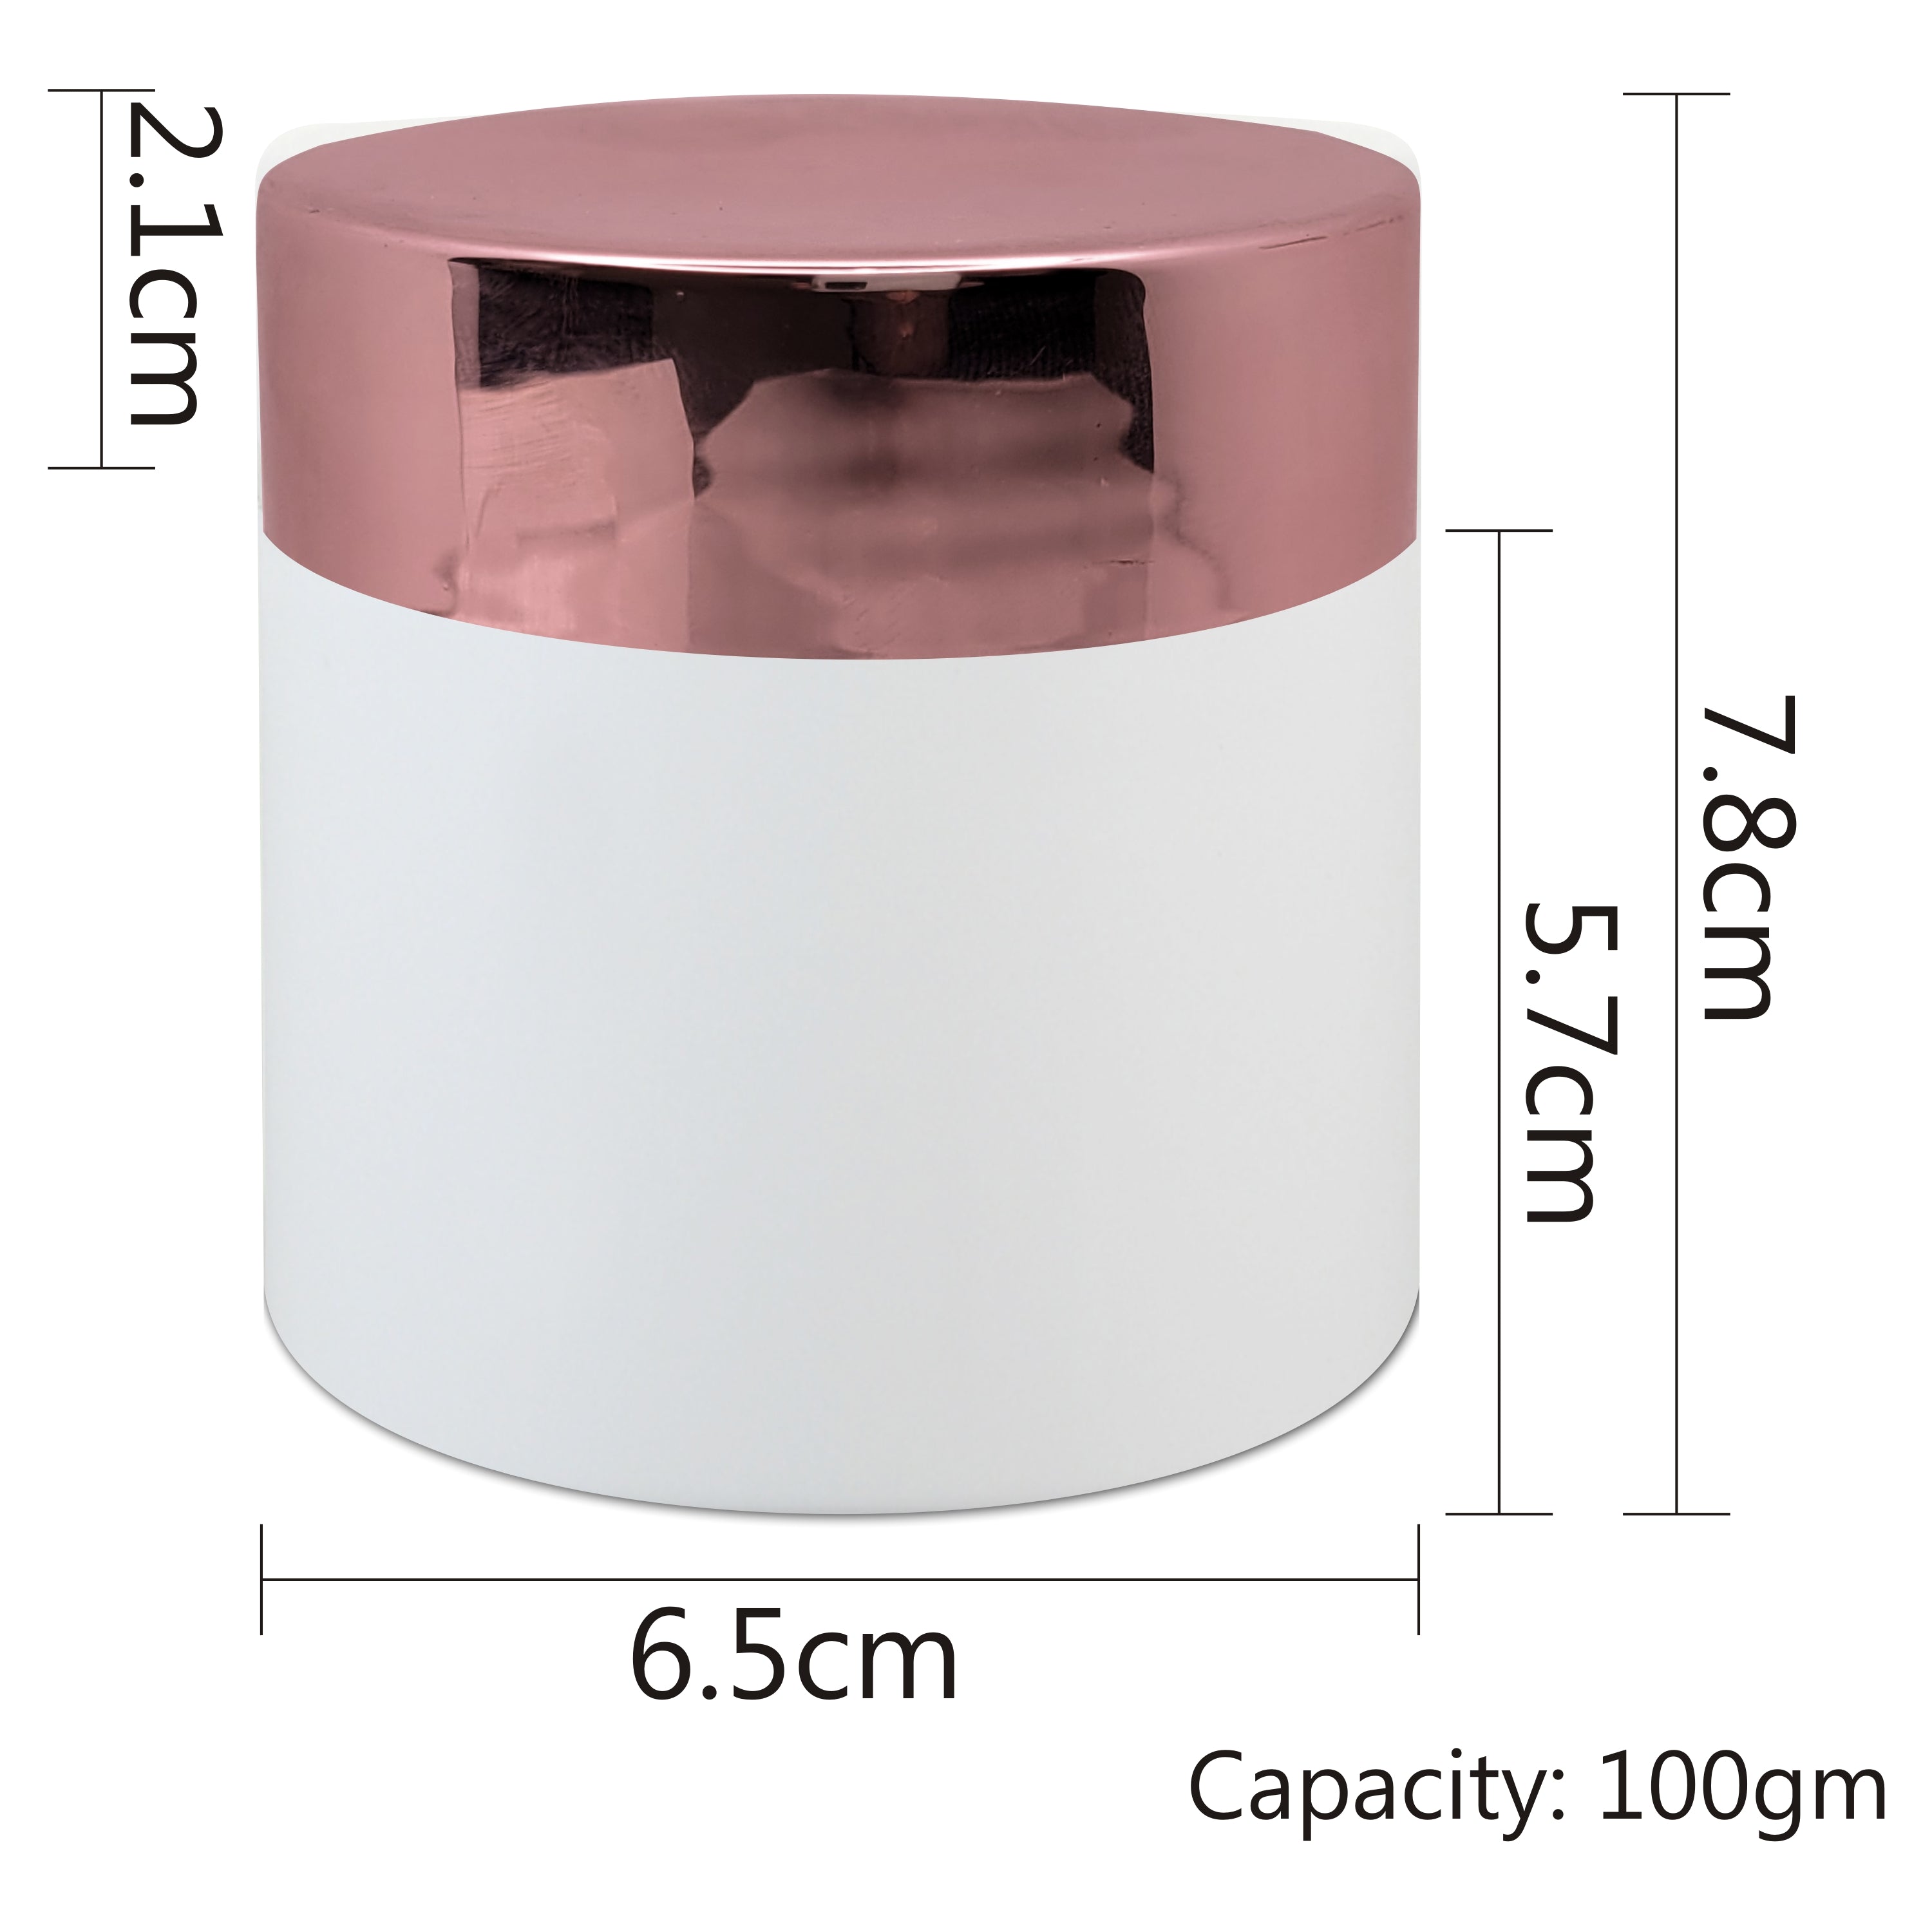 Empty White Color Cosmetics Jar with Rose Gold Cap for Cream- 50gm, 100gm [ZMJ16]